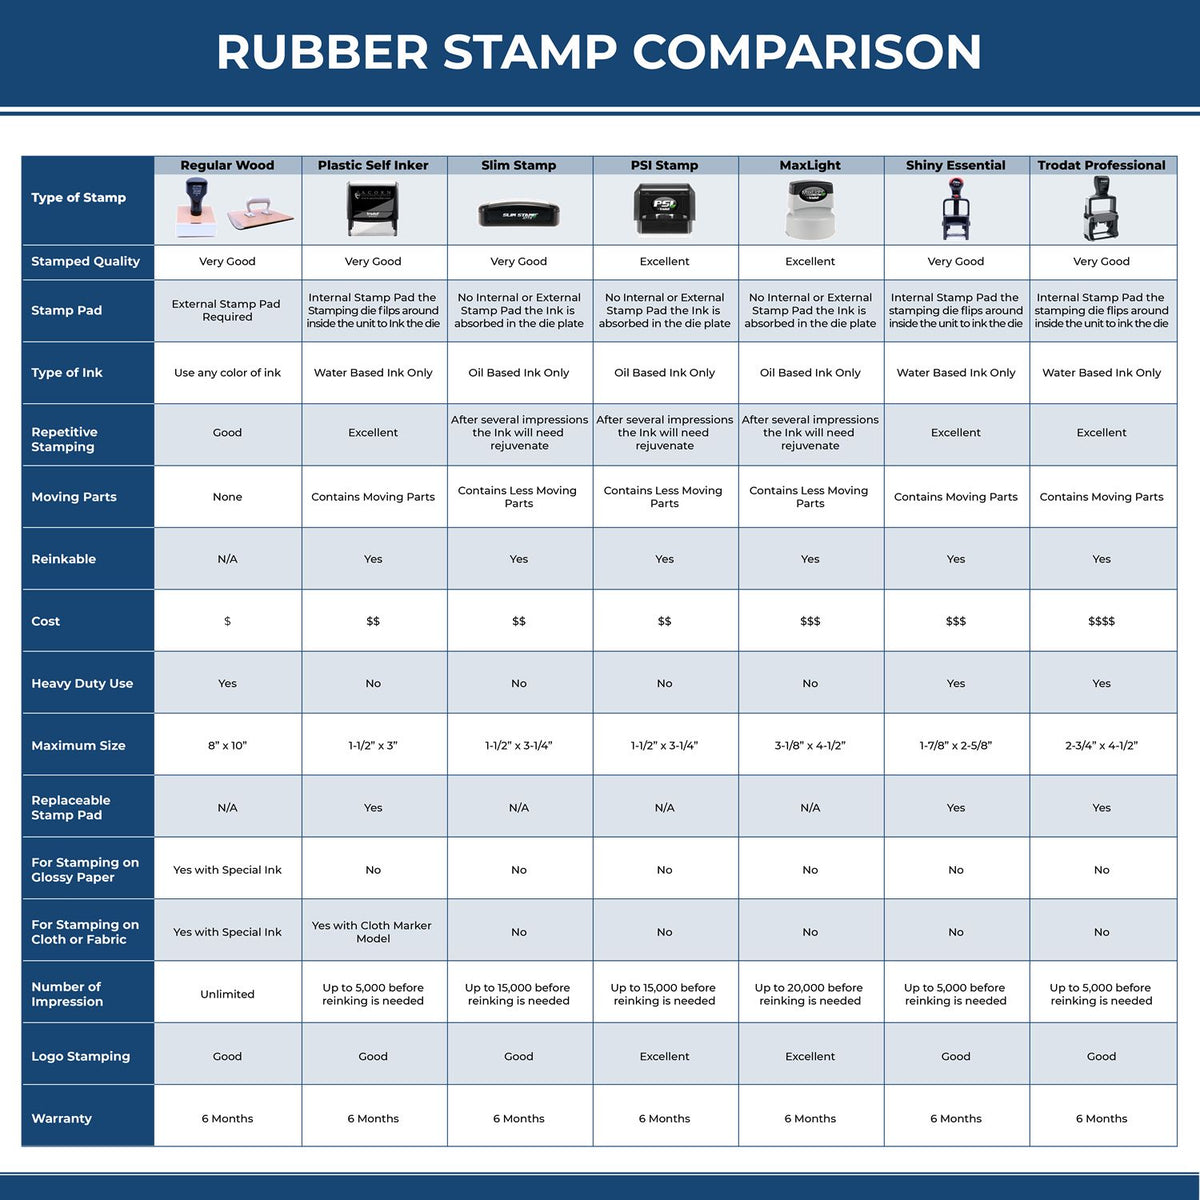 Large Self Inking Distributed Stamp With Line 4611S Rubber Stamp Comparison